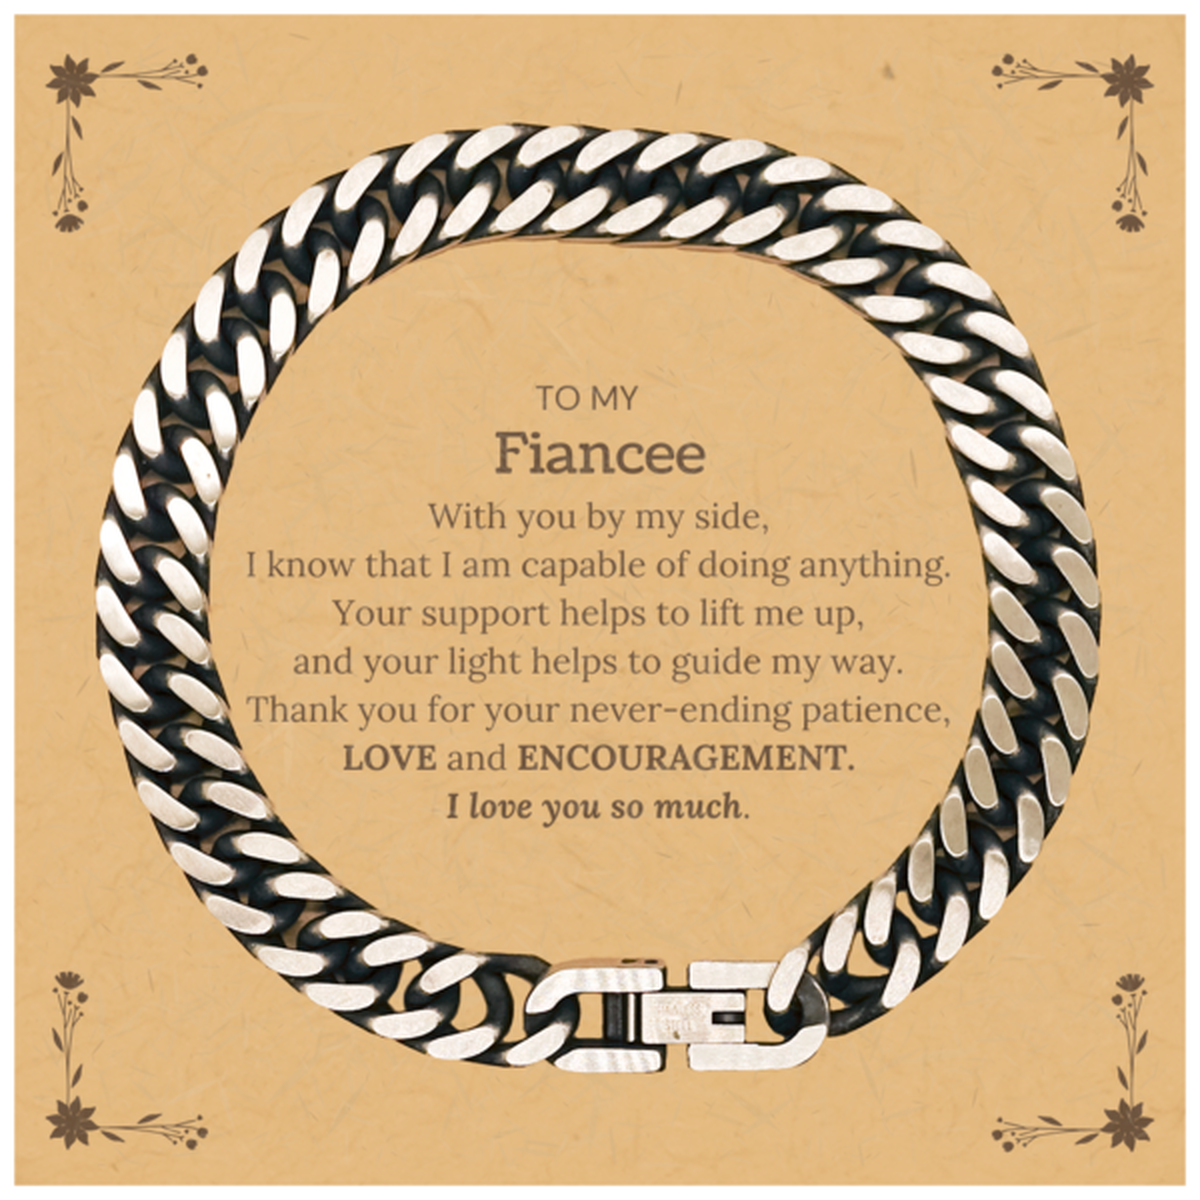 Appreciation Fiancee Cuban Link Chain Bracelet Gifts, To My Fiancee Birthday Christmas Wedding Keepsake Gifts for Fiancee With you by my side, I know that I am capable of doing anything. I love you so much